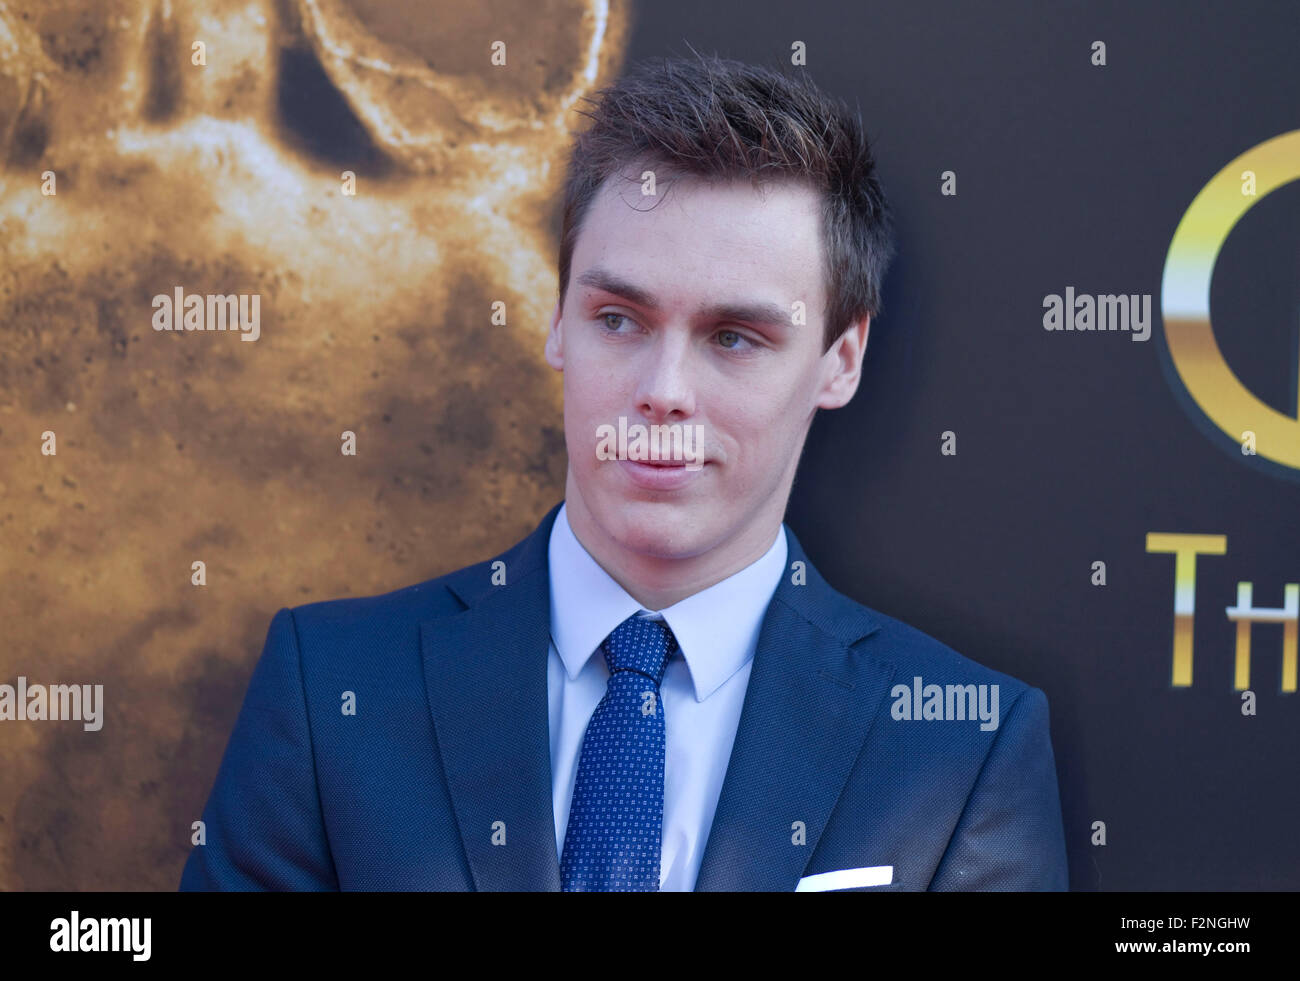 Monaco, September 21, 2015: Louis Ducruet (first son of Princess Stephanie of Monaco) at the Goldenfoot Football Awards./picture alliance Stock Photo